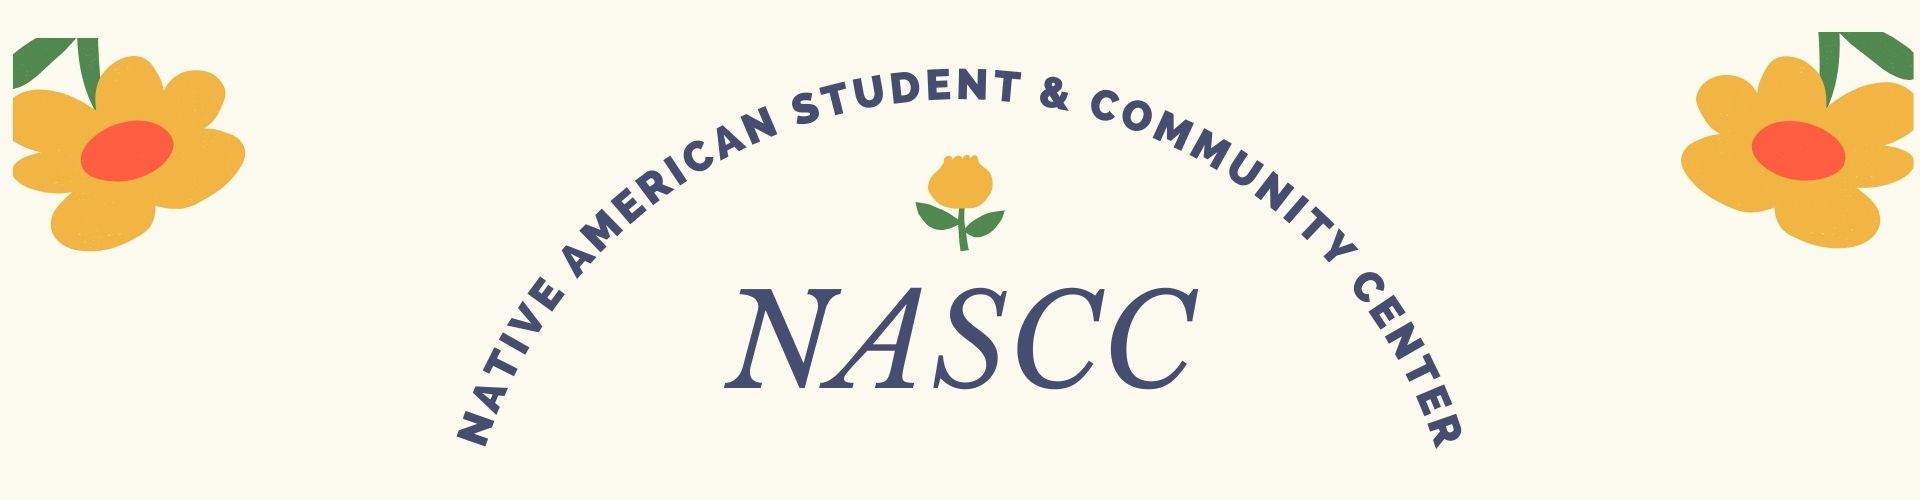 Blue "Native American Student & Community Center" text against a beige background with flowers in the corners